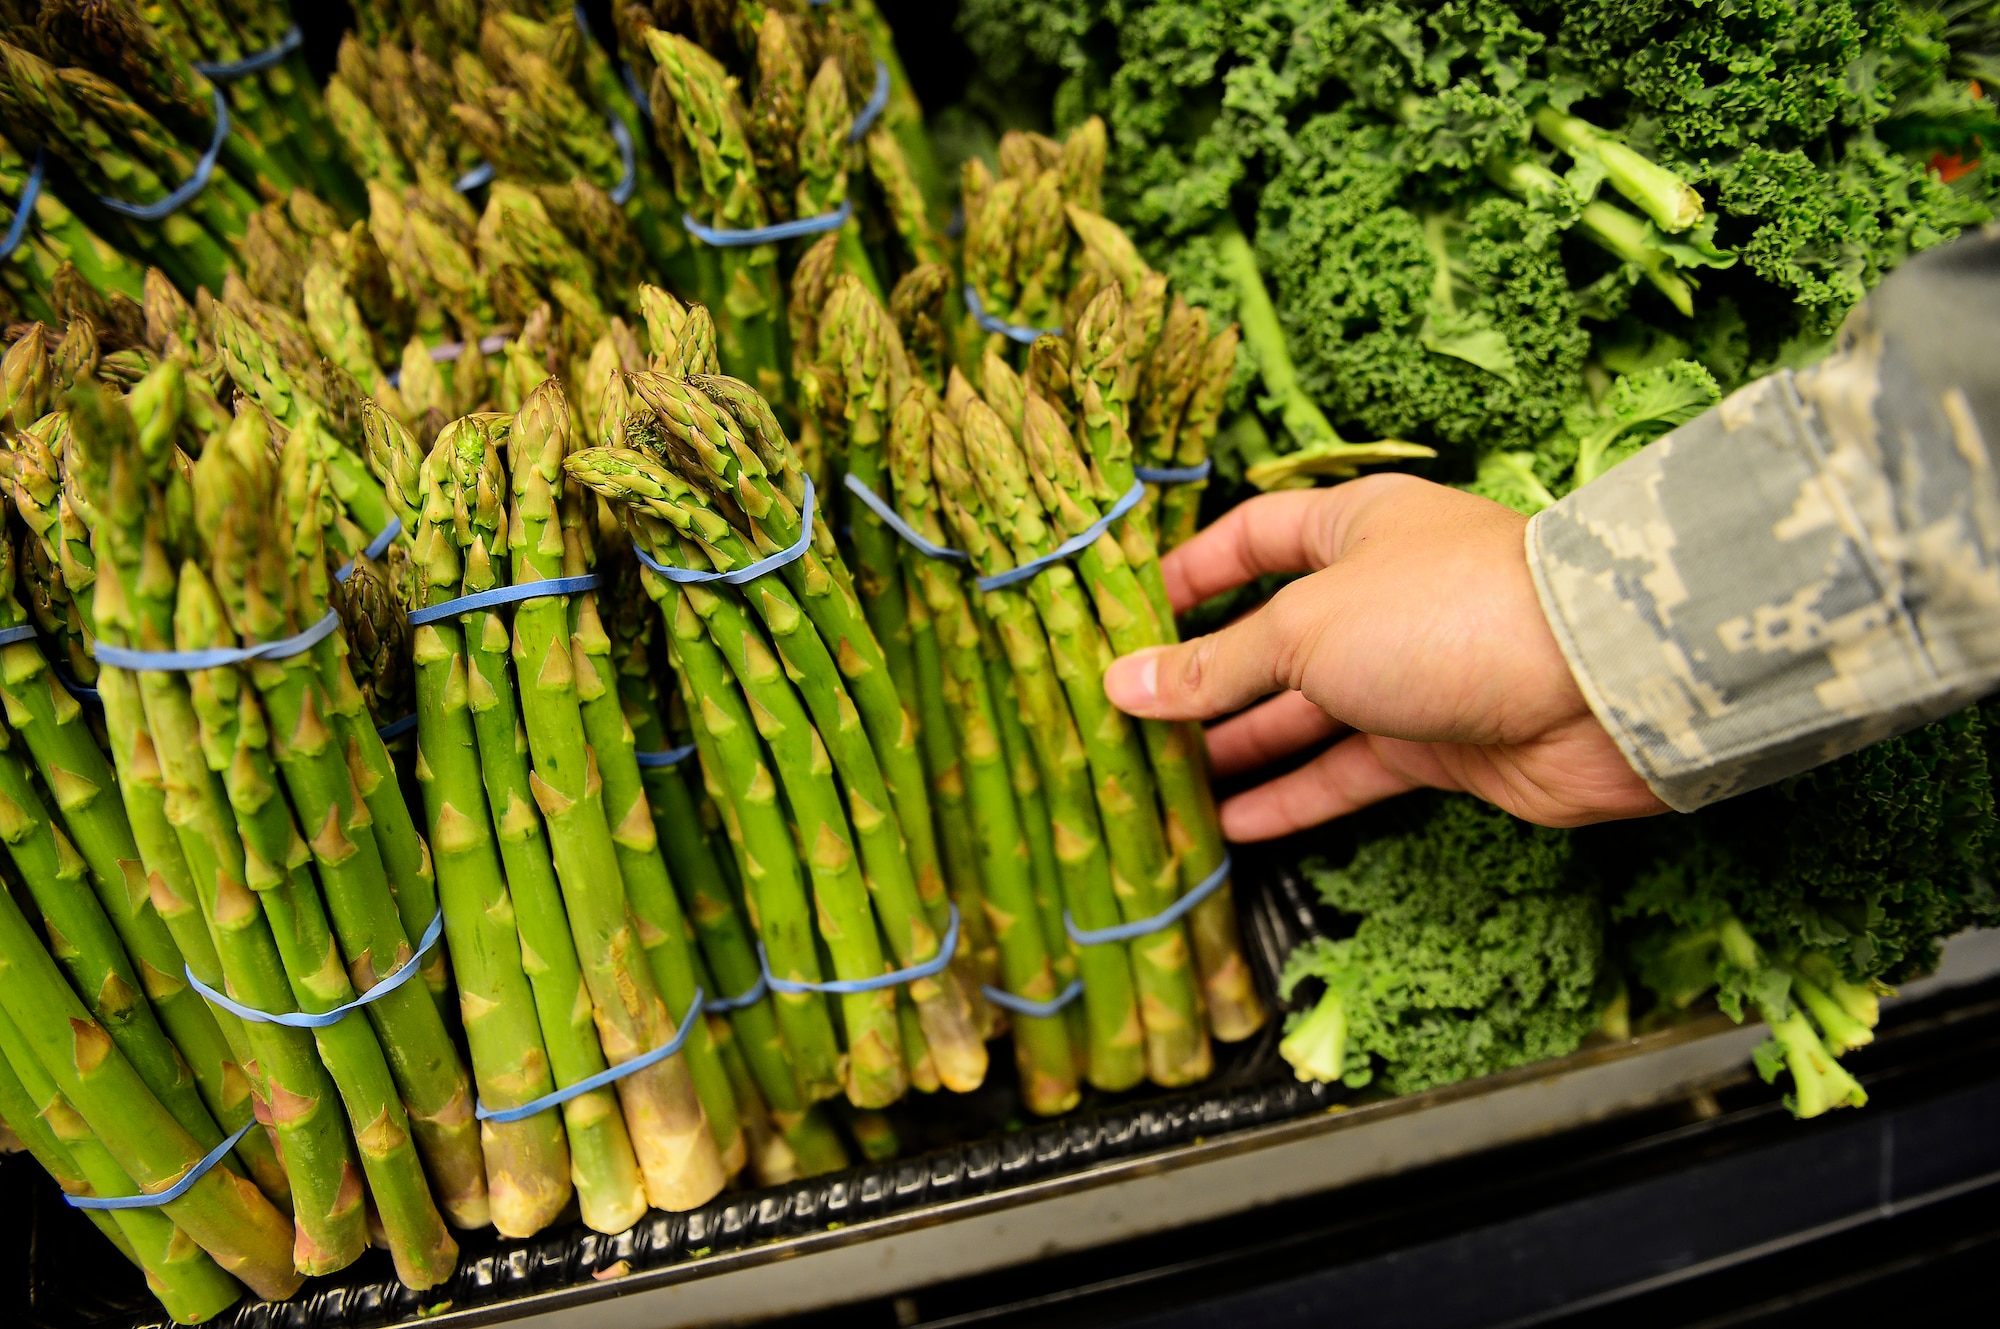 Airmen shop for fresh produce at the commissary at Royal Air Force Lakenheath, England, Dec. 7, 2015. The produce sold at the commissary is the same produce provided to the Royal Family. (U.S. Air Force photo by Airman 1st Class Erin R. Babis/Released)